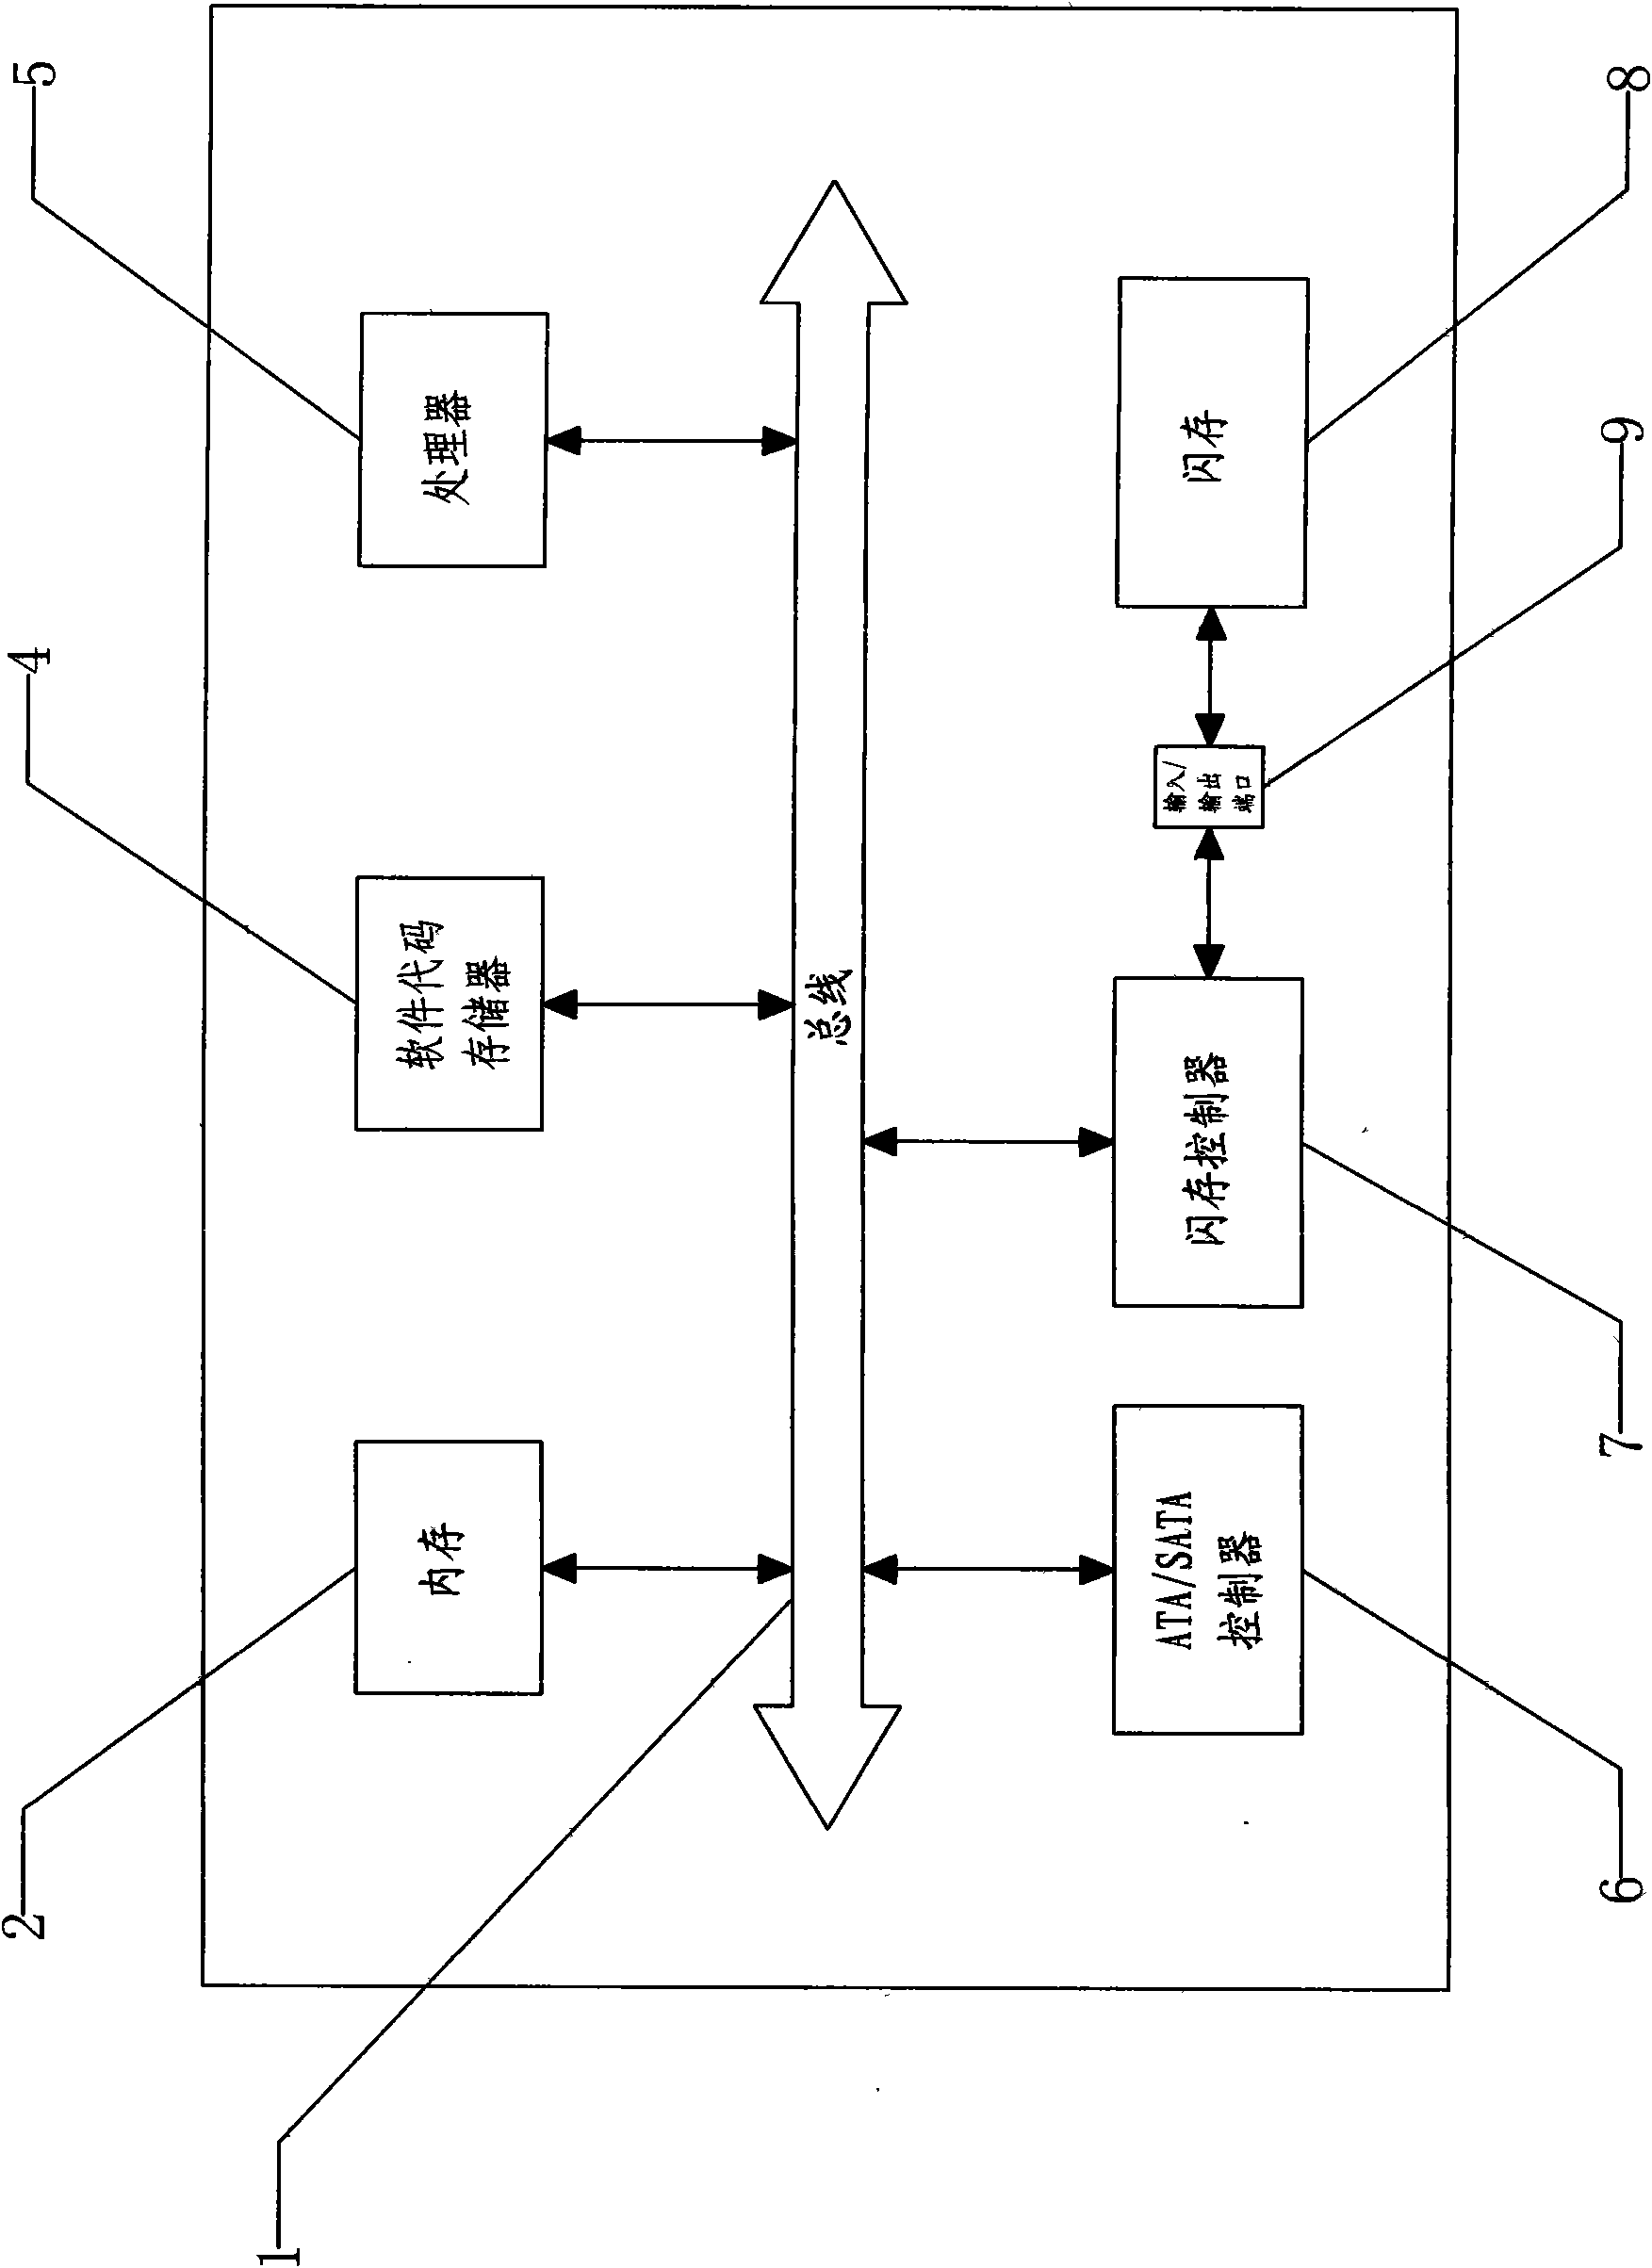 Structure of solid state disk and method for accelerating initialization thereof